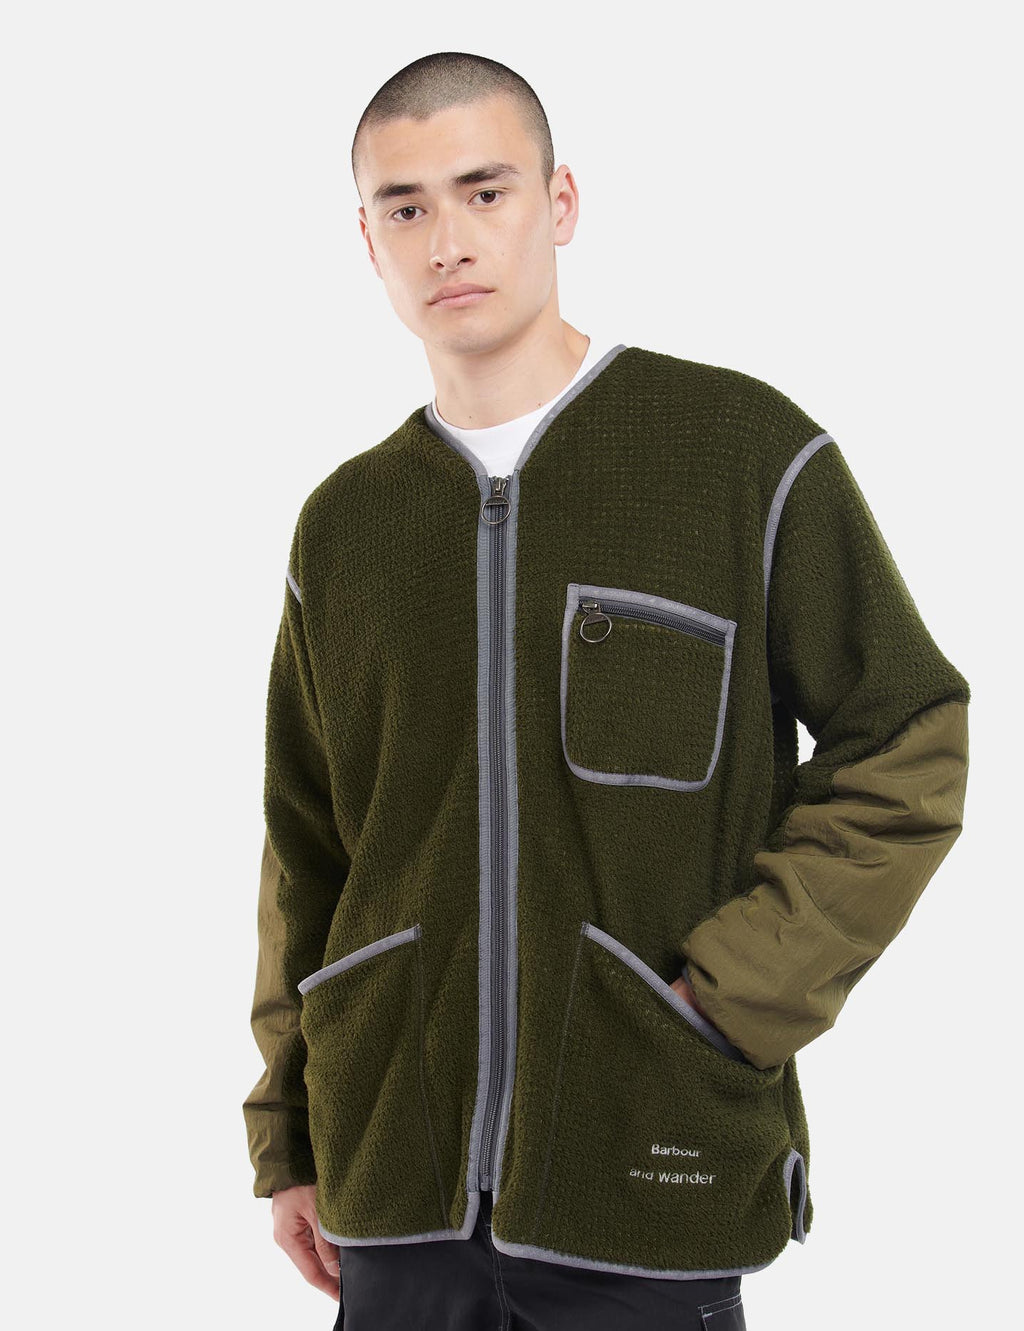 Barbour x And Wander Fleece オリーブ グリーン IArticle.